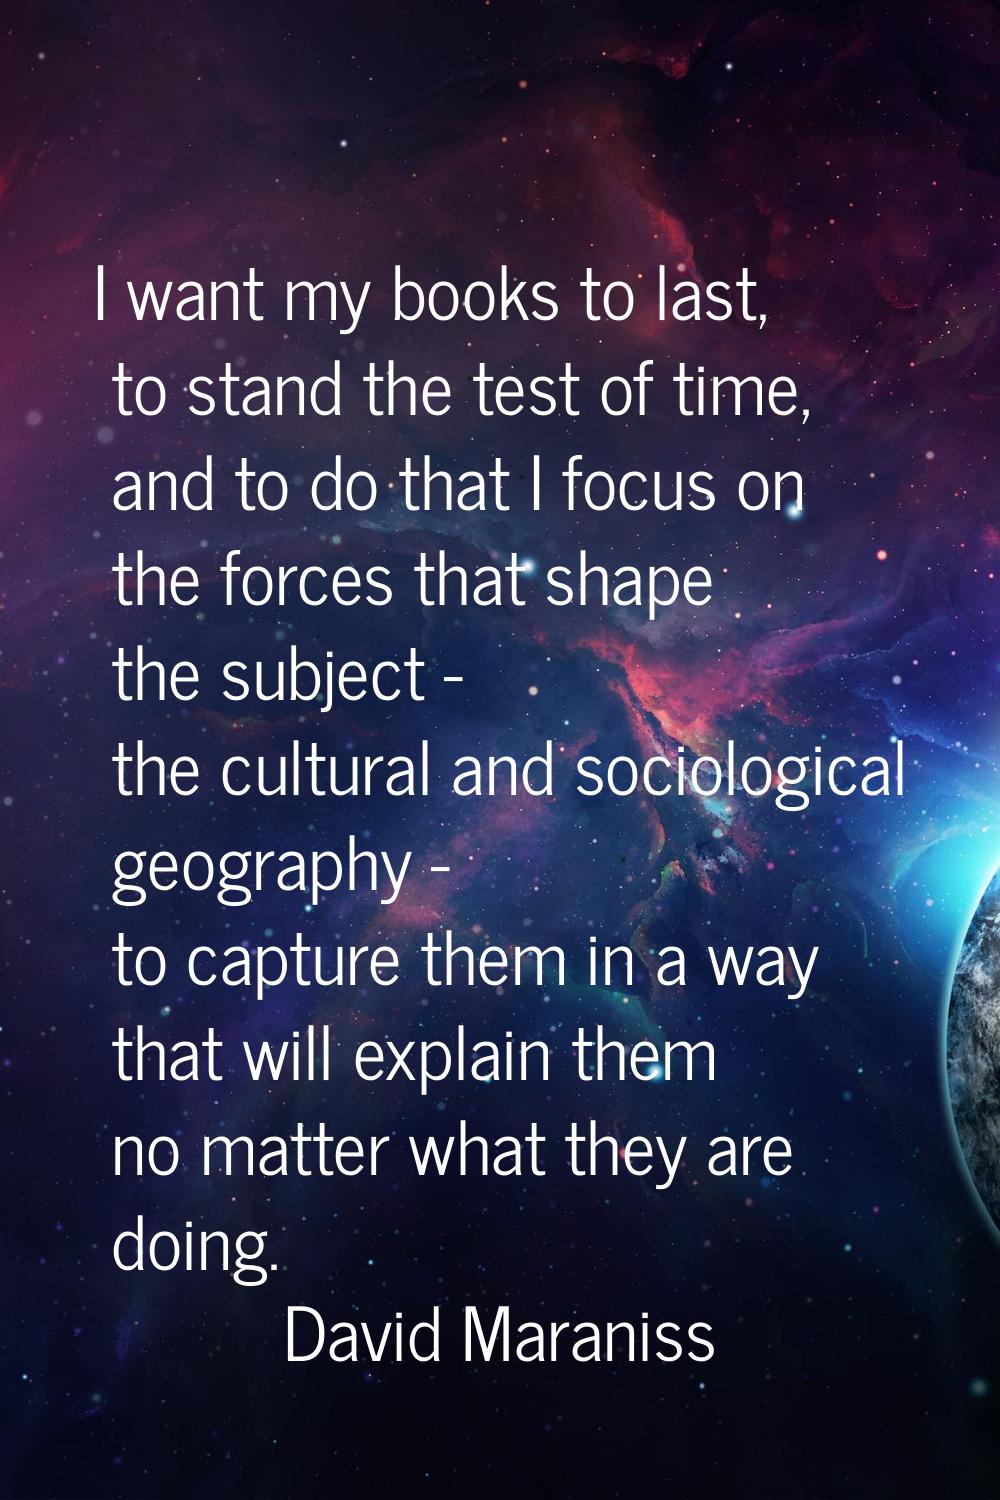 I want my books to last, to stand the test of time, and to do that I focus on the forces that shape